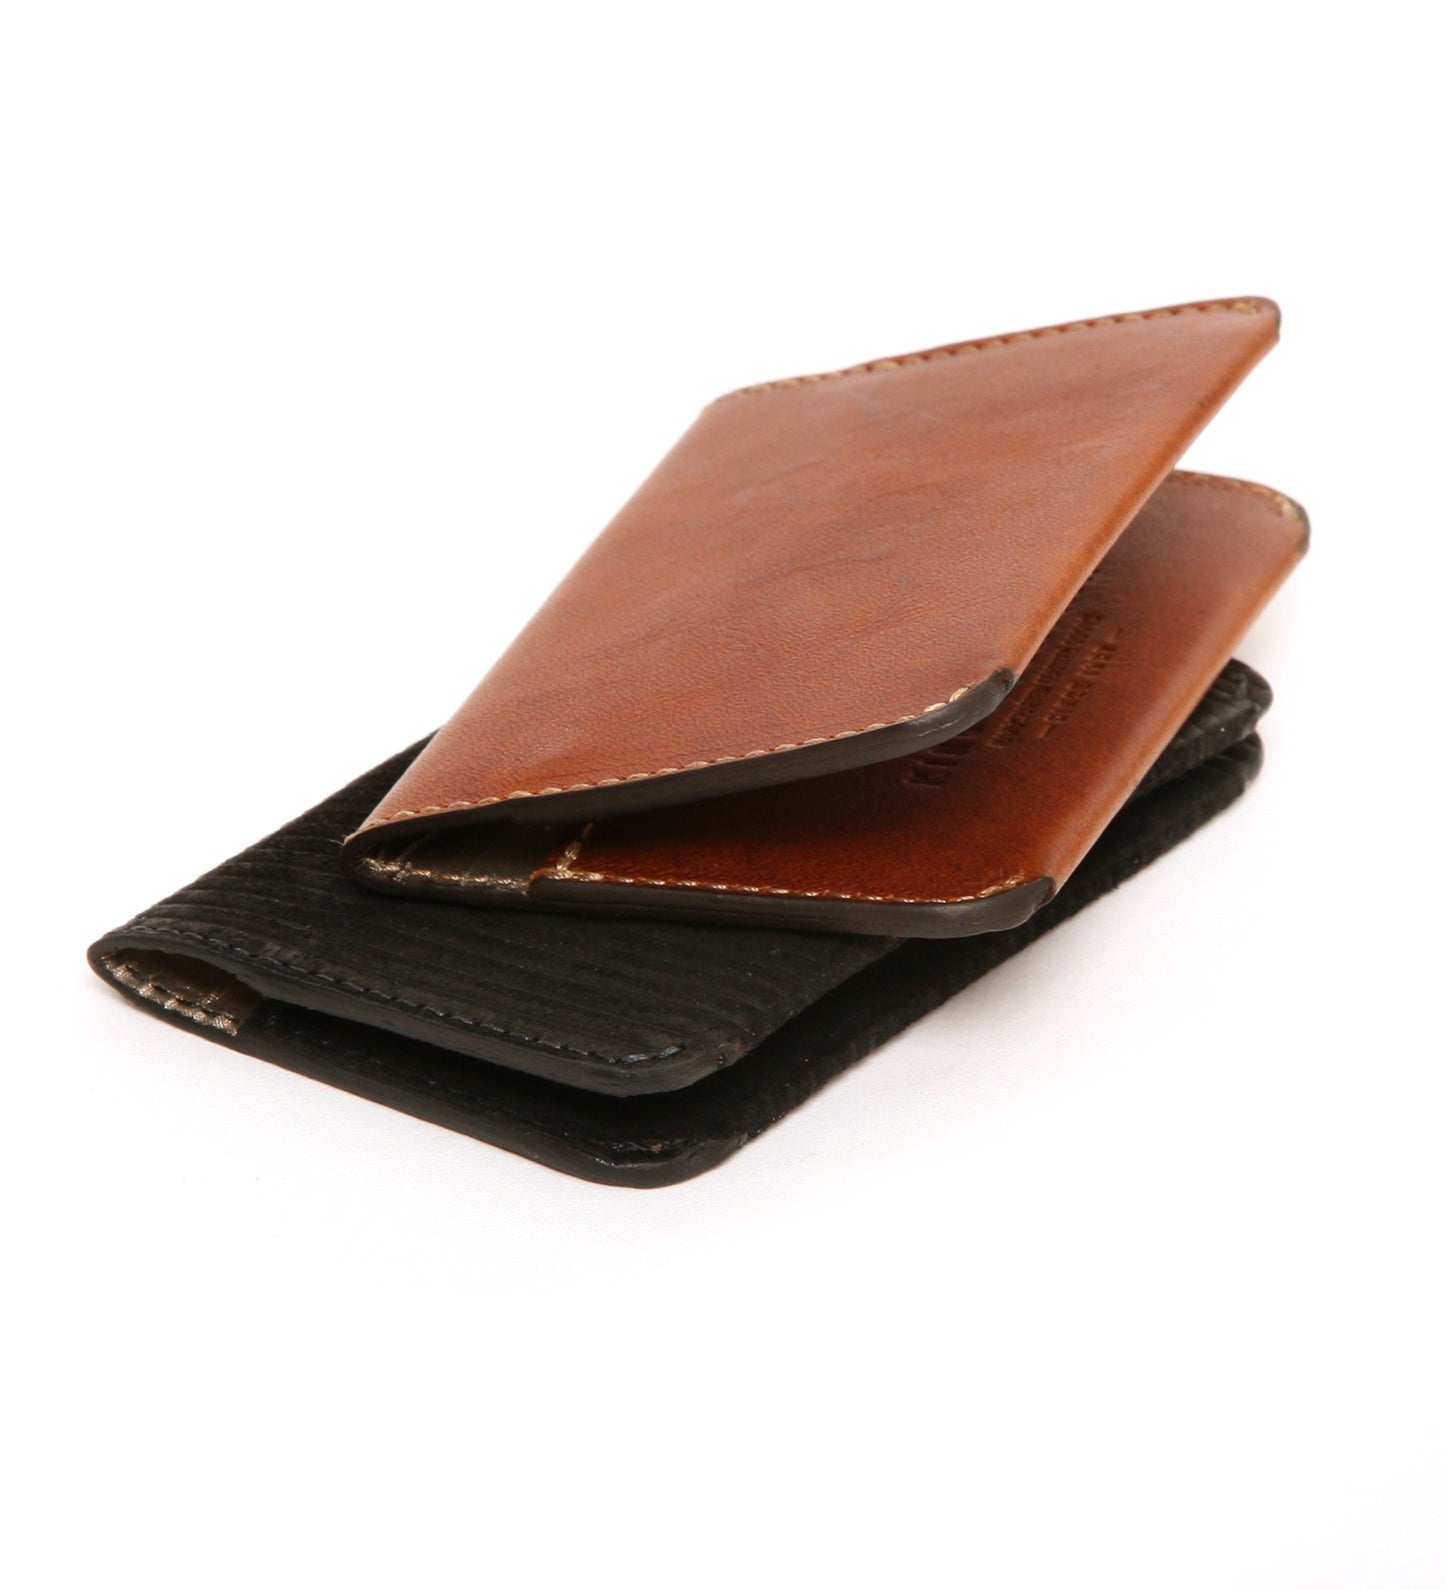 JUNO card case lined